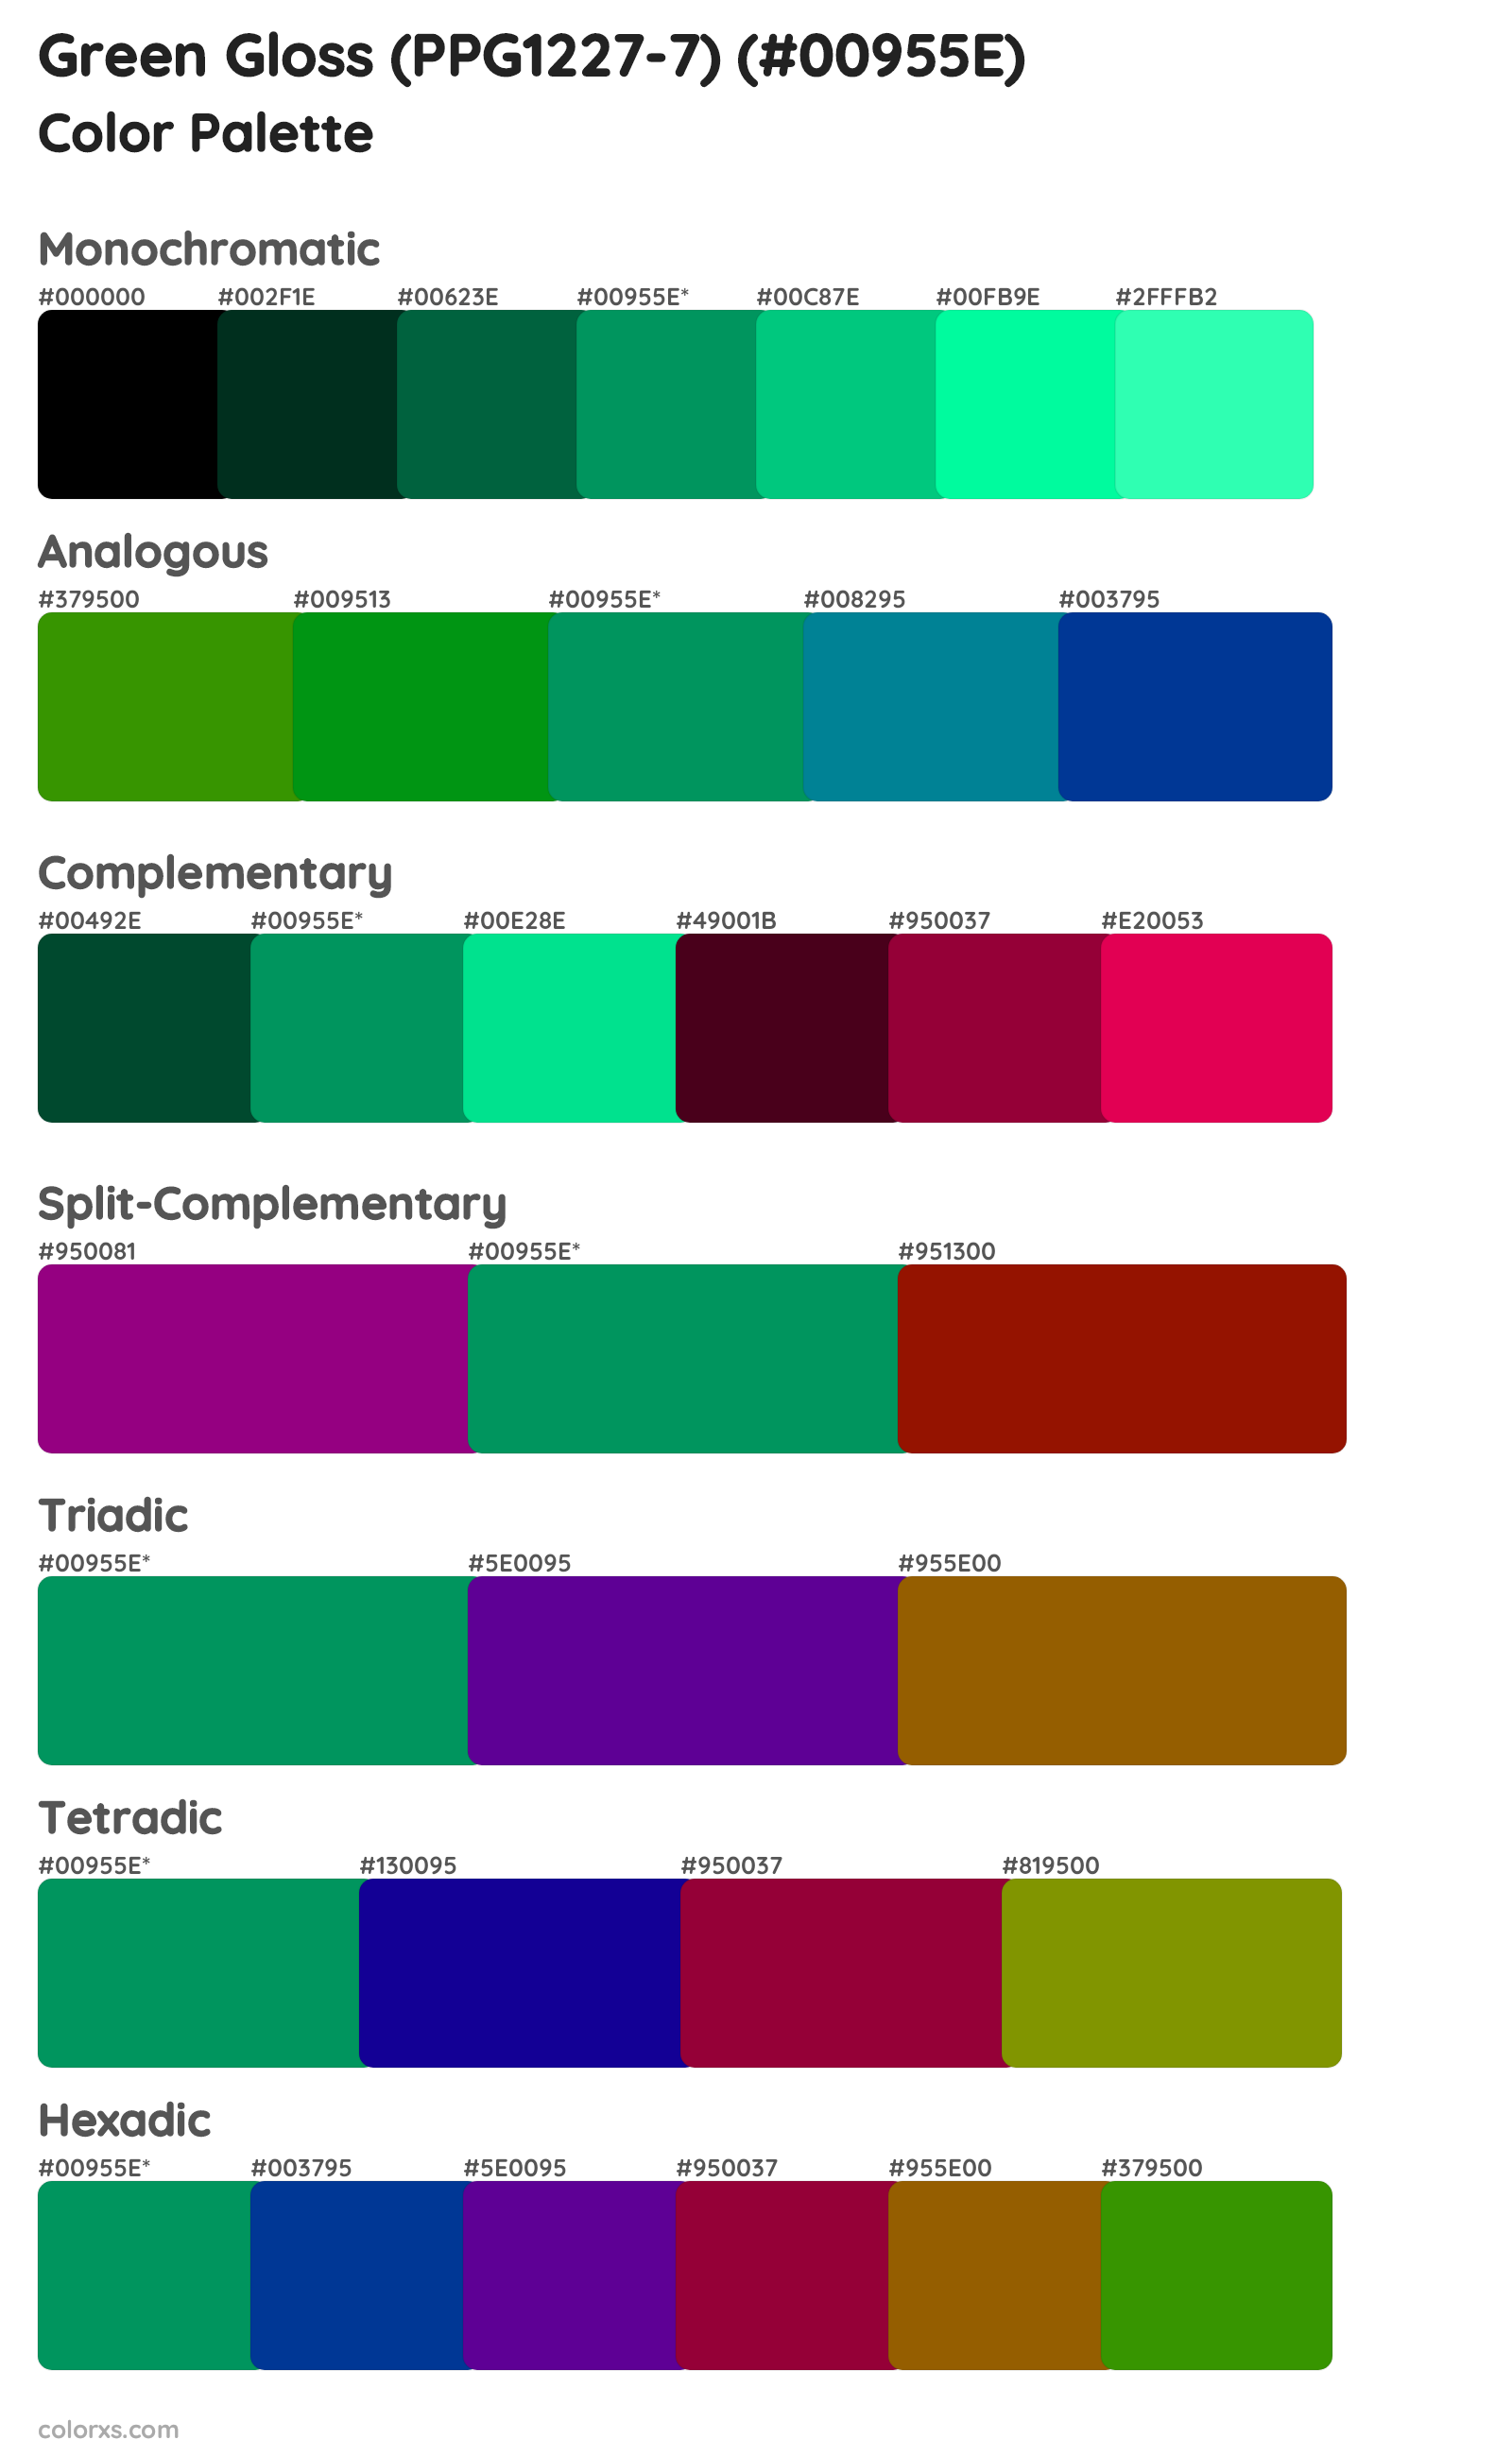 Green Gloss (PPG1227-7) Color Scheme Palettes